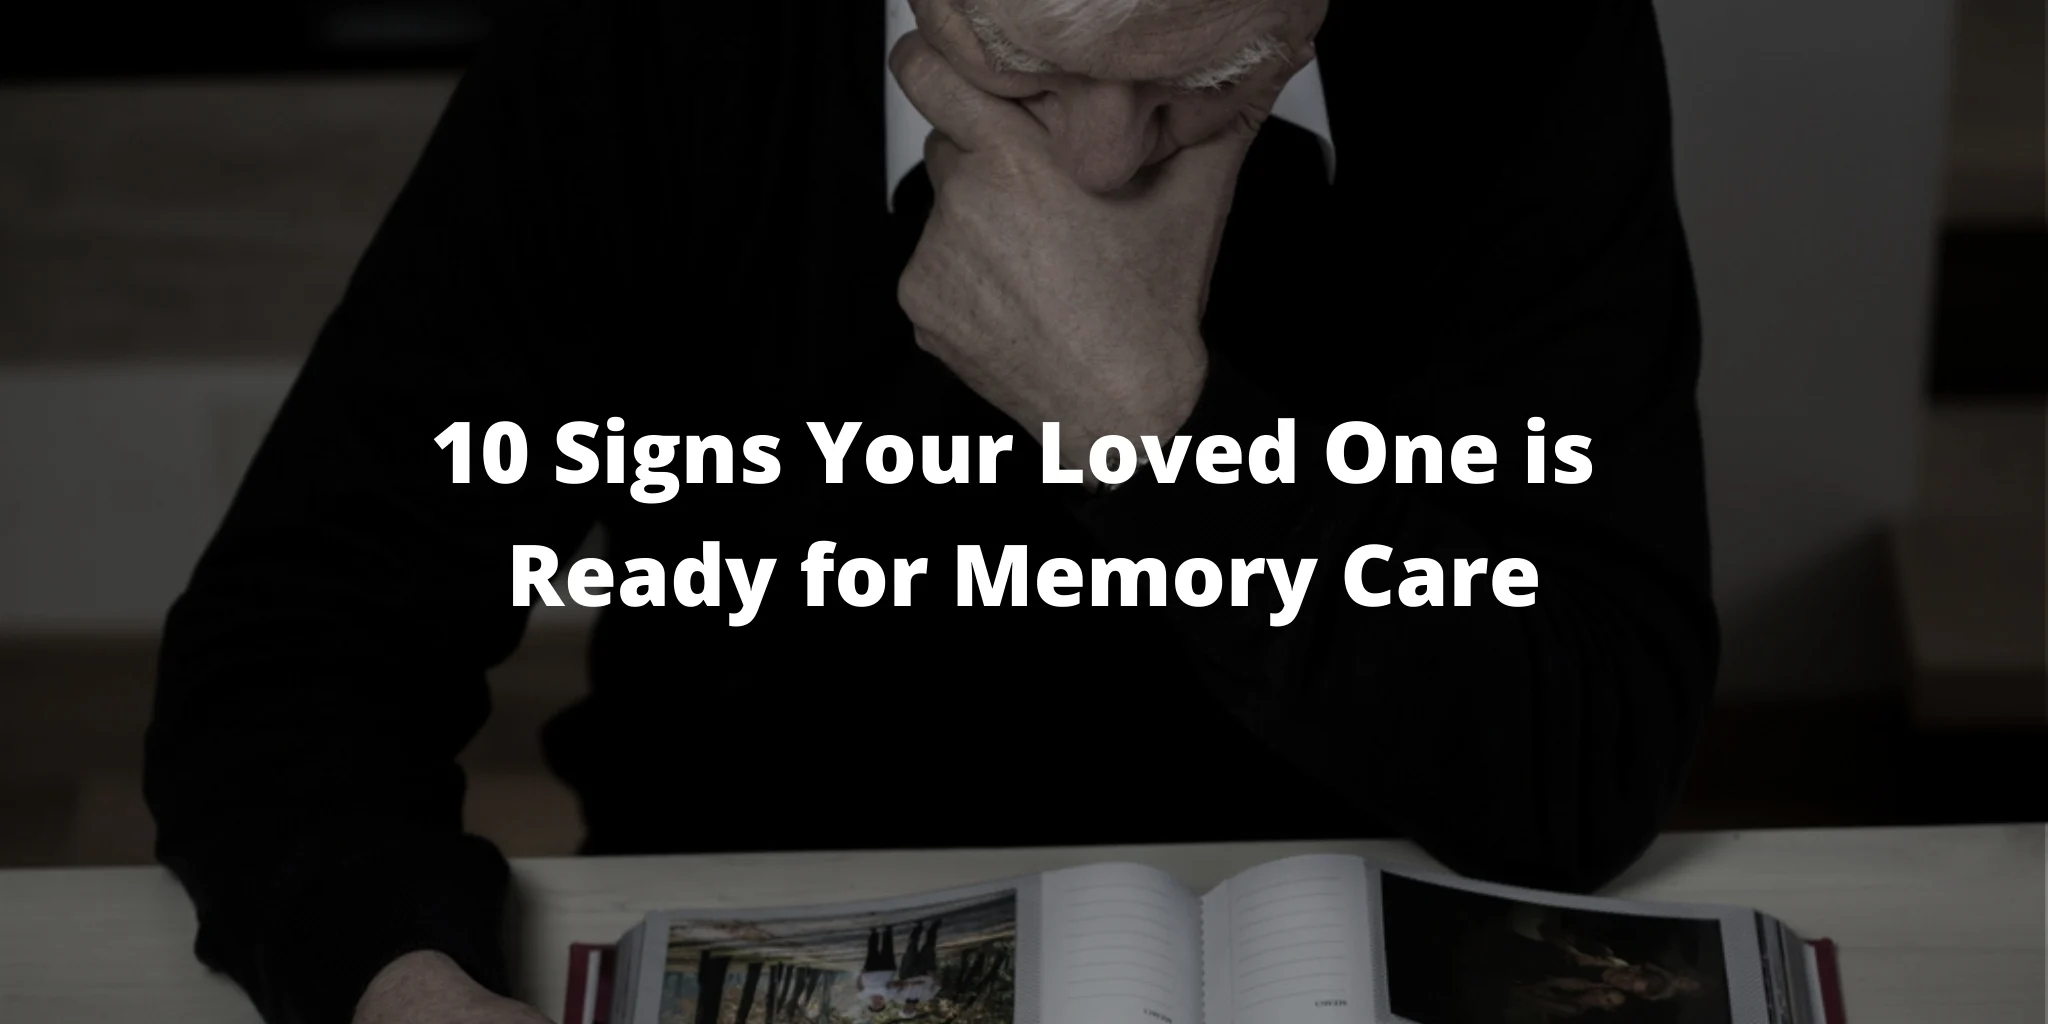 10 Signs Your Loved One is Ready for Memory Care